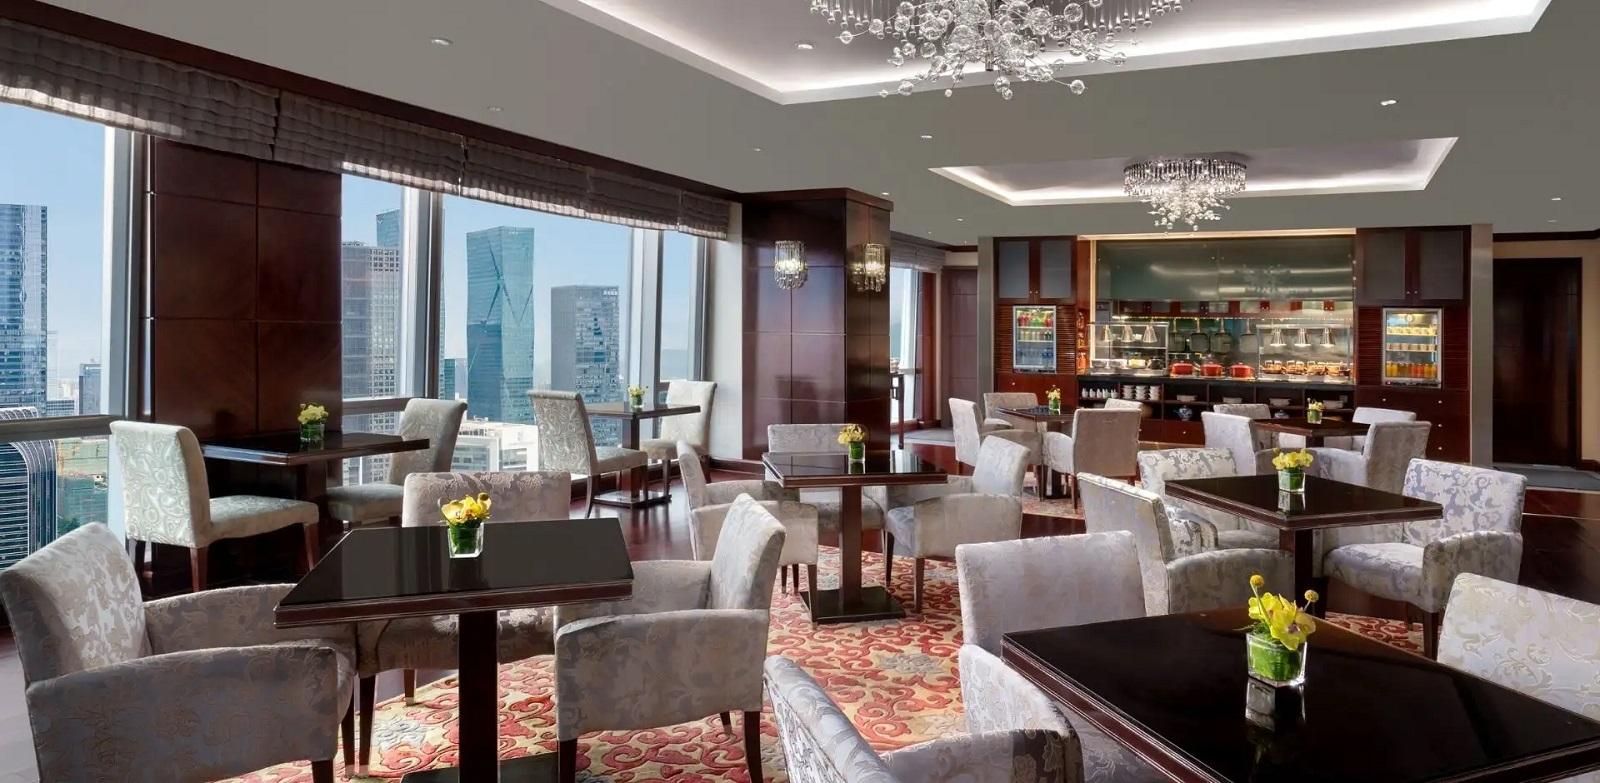 The 10 Best Hotel Executive Club Lounges in Shenzhen